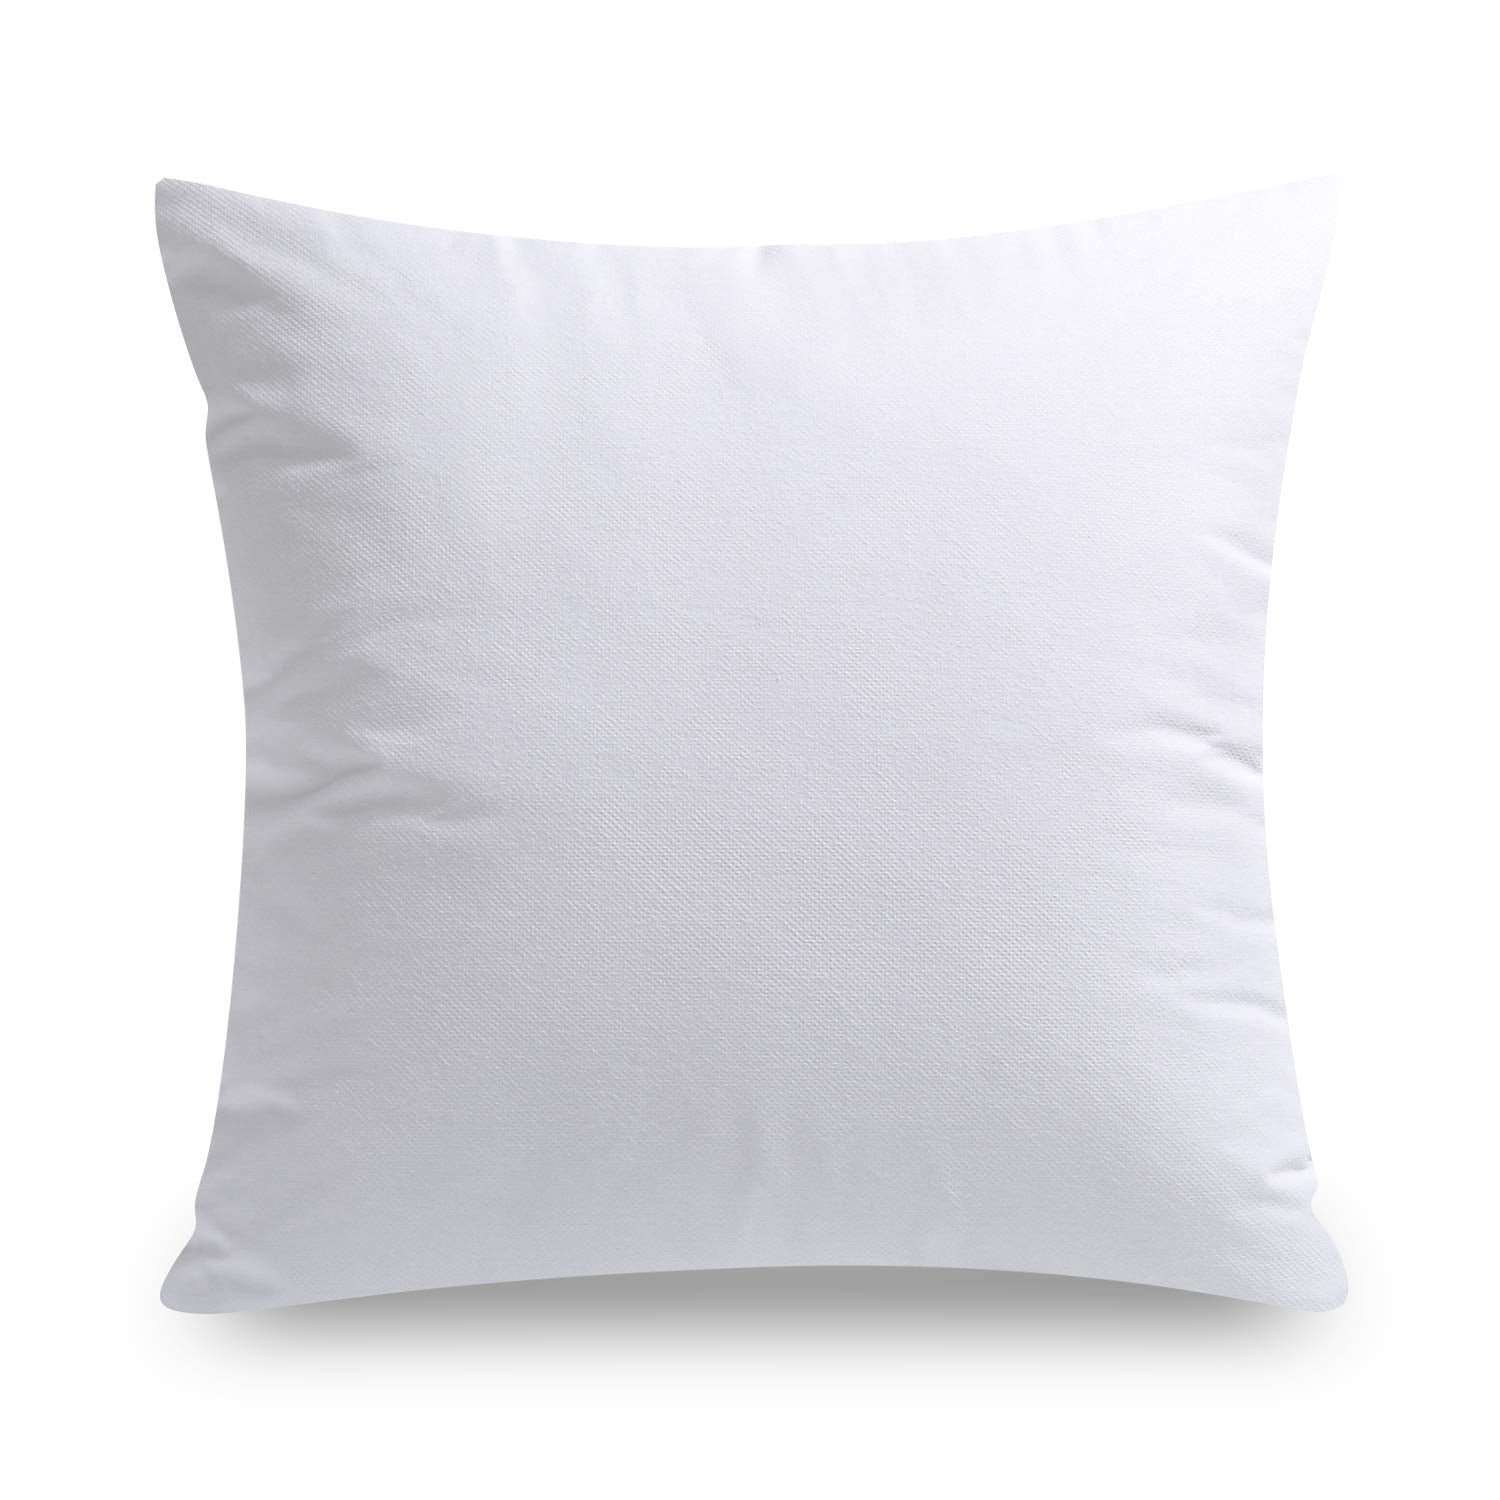 Phantoscope 18x18 Pillow Insert - Throw Pillow Insert with 100% Cotton  Cover - 18 Inch Square Form Microfiber Pillow Sham Stuffer - Couch Cushion